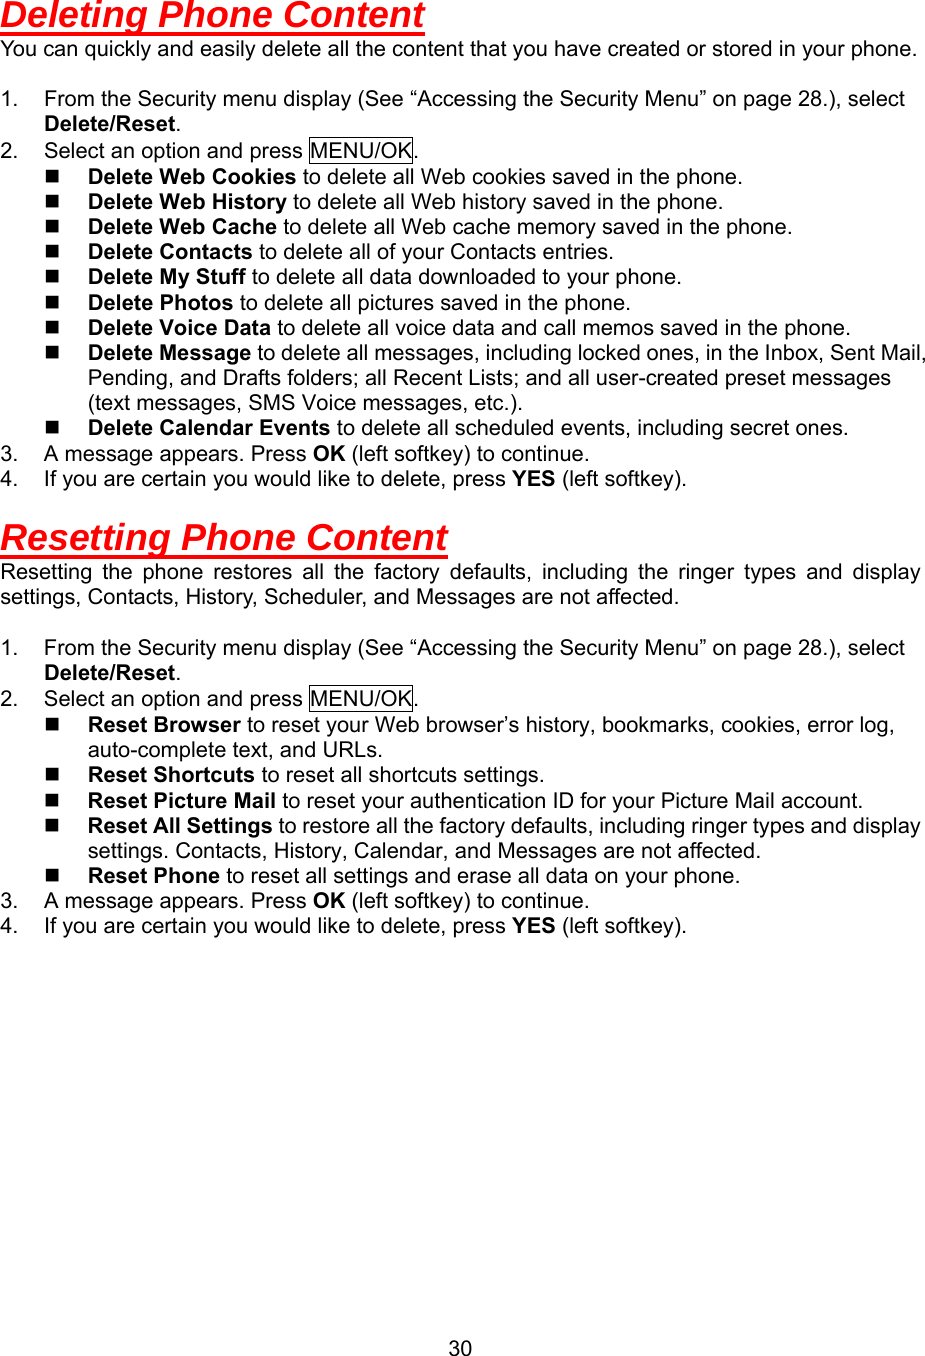  30Deleting Phone Content You can quickly and easily delete all the content that you have created or stored in your phone.  1.  From the Security menu display (See “Accessing the Security Menu” on page 28.), select Delete/Reset. 2.  Select an option and press MENU/OK.   Delete Web Cookies to delete all Web cookies saved in the phone.   Delete Web History to delete all Web history saved in the phone.   Delete Web Cache to delete all Web cache memory saved in the phone.   Delete Contacts to delete all of your Contacts entries.   Delete My Stuff to delete all data downloaded to your phone.   Delete Photos to delete all pictures saved in the phone.   Delete Voice Data to delete all voice data and call memos saved in the phone.   Delete Message to delete all messages, including locked ones, in the Inbox, Sent Mail, Pending, and Drafts folders; all Recent Lists; and all user-created preset messages (text messages, SMS Voice messages, etc.).   Delete Calendar Events to delete all scheduled events, including secret ones. 3.  A message appears. Press OK (left softkey) to continue. 4.  If you are certain you would like to delete, press YES (left softkey).  Resetting Phone Content Resetting the phone restores all the factory defaults, including the ringer types and display settings, Contacts, History, Scheduler, and Messages are not affected.  1.  From the Security menu display (See “Accessing the Security Menu” on page 28.), select Delete/Reset. 2.  Select an option and press MENU/OK.   Reset Browser to reset your Web browser’s history, bookmarks, cookies, error log, auto-complete text, and URLs.   Reset Shortcuts to reset all shortcuts settings.   Reset Picture Mail to reset your authentication ID for your Picture Mail account.   Reset All Settings to restore all the factory defaults, including ringer types and display settings. Contacts, History, Calendar, and Messages are not affected.   Reset Phone to reset all settings and erase all data on your phone. 3.  A message appears. Press OK (left softkey) to continue. 4.  If you are certain you would like to delete, press YES (left softkey).  